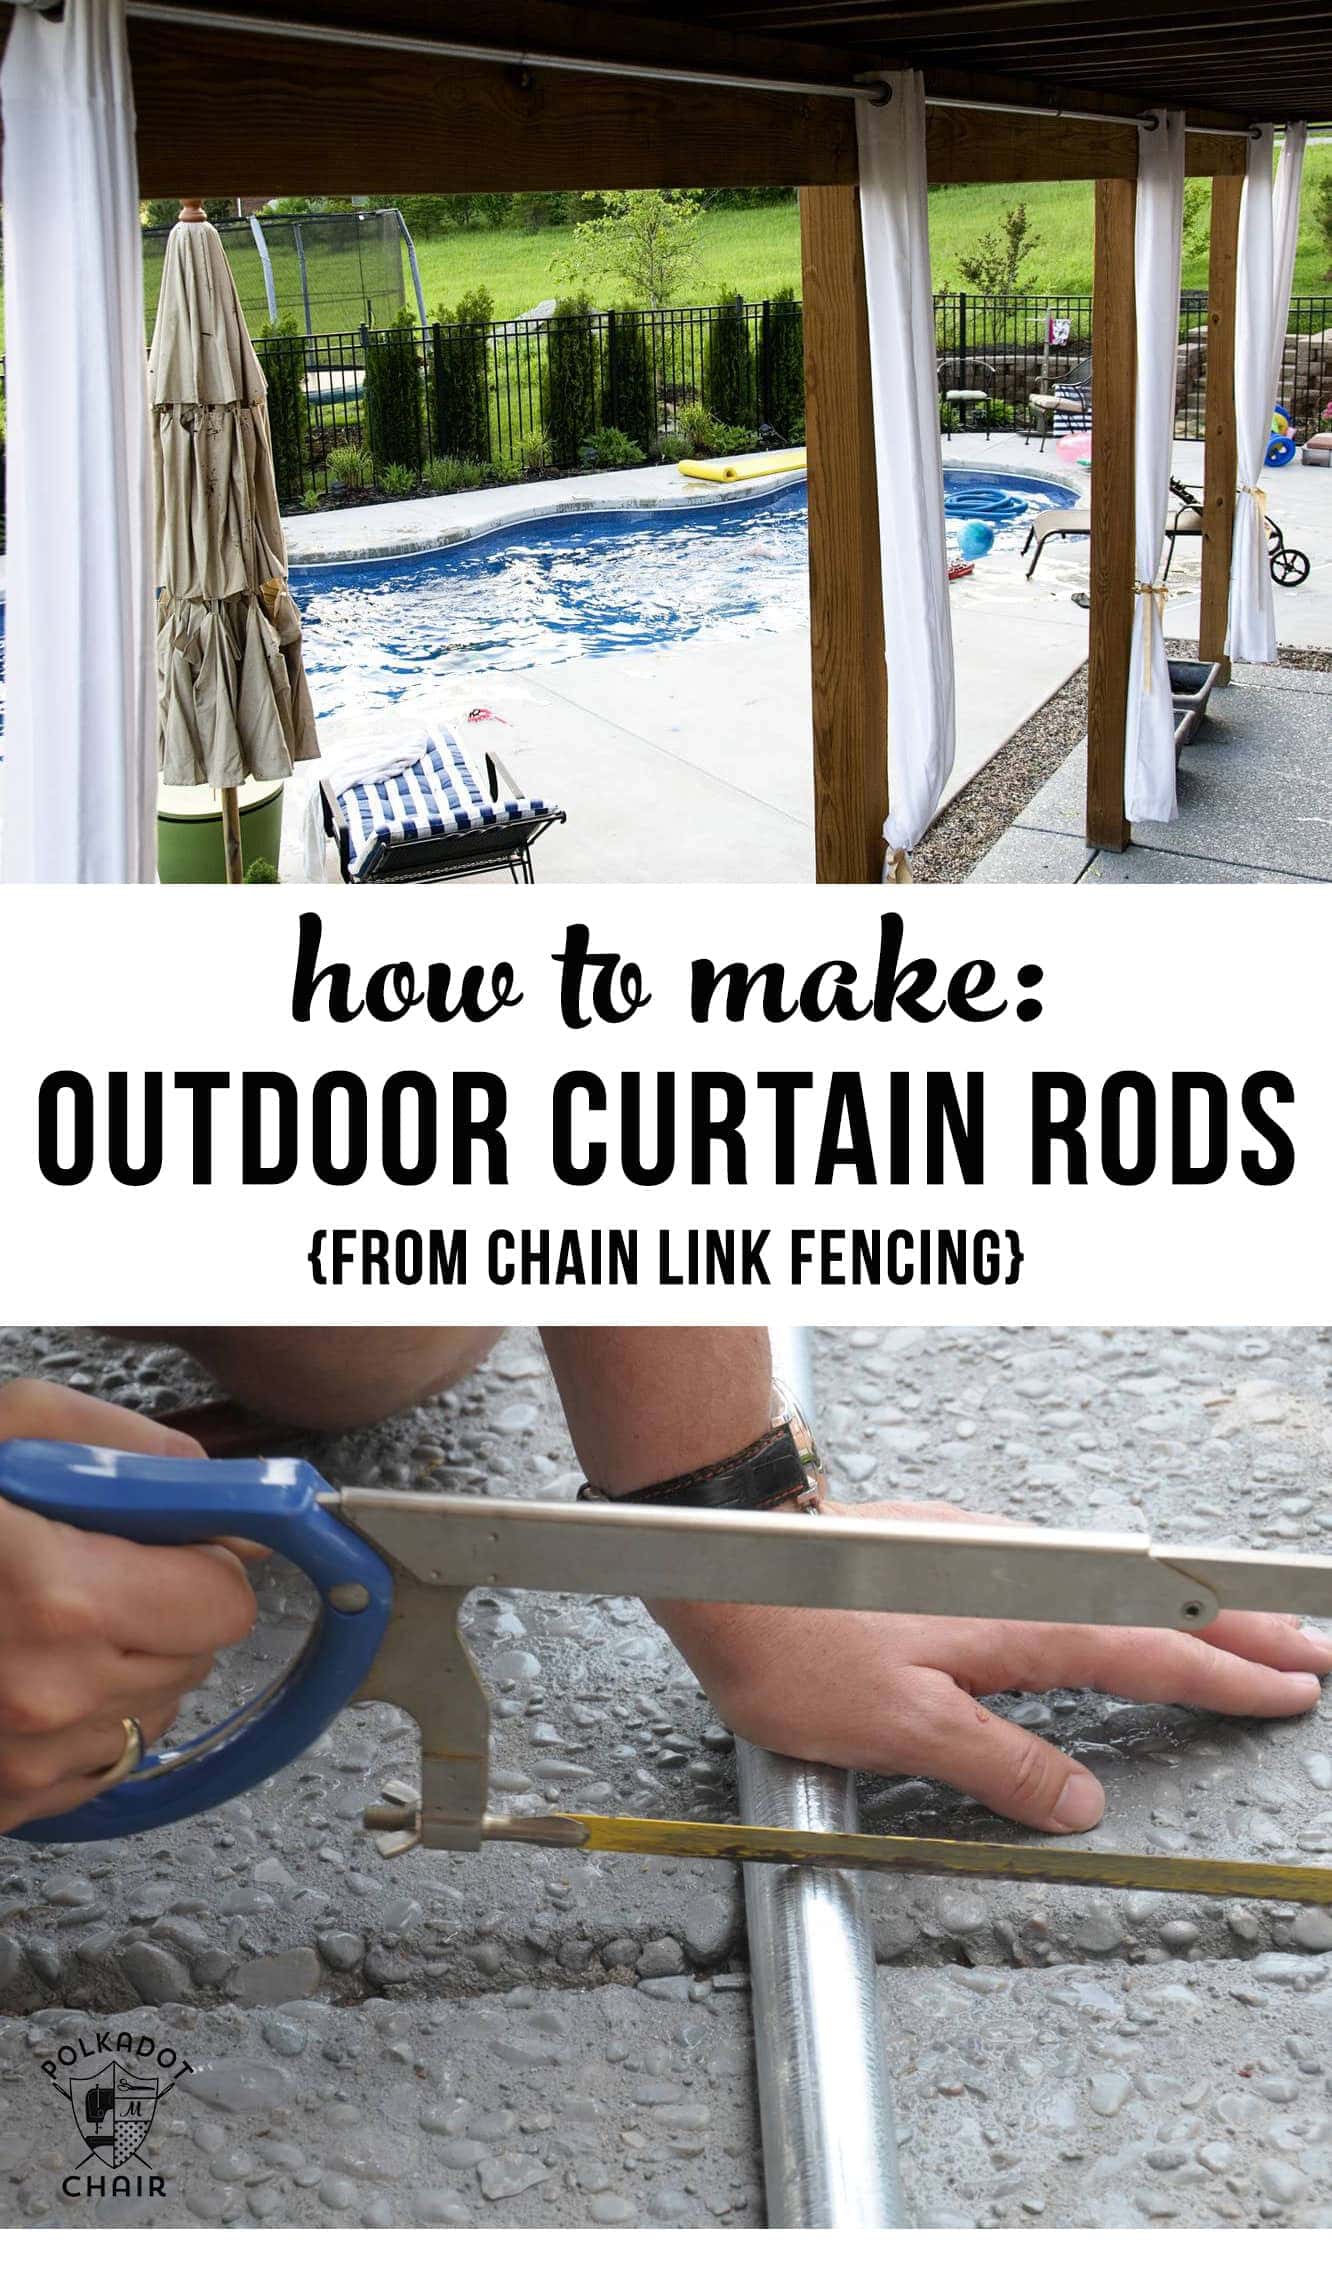 How to Hang Outdoor Drapes & DIY Outdoor Curtain Rods